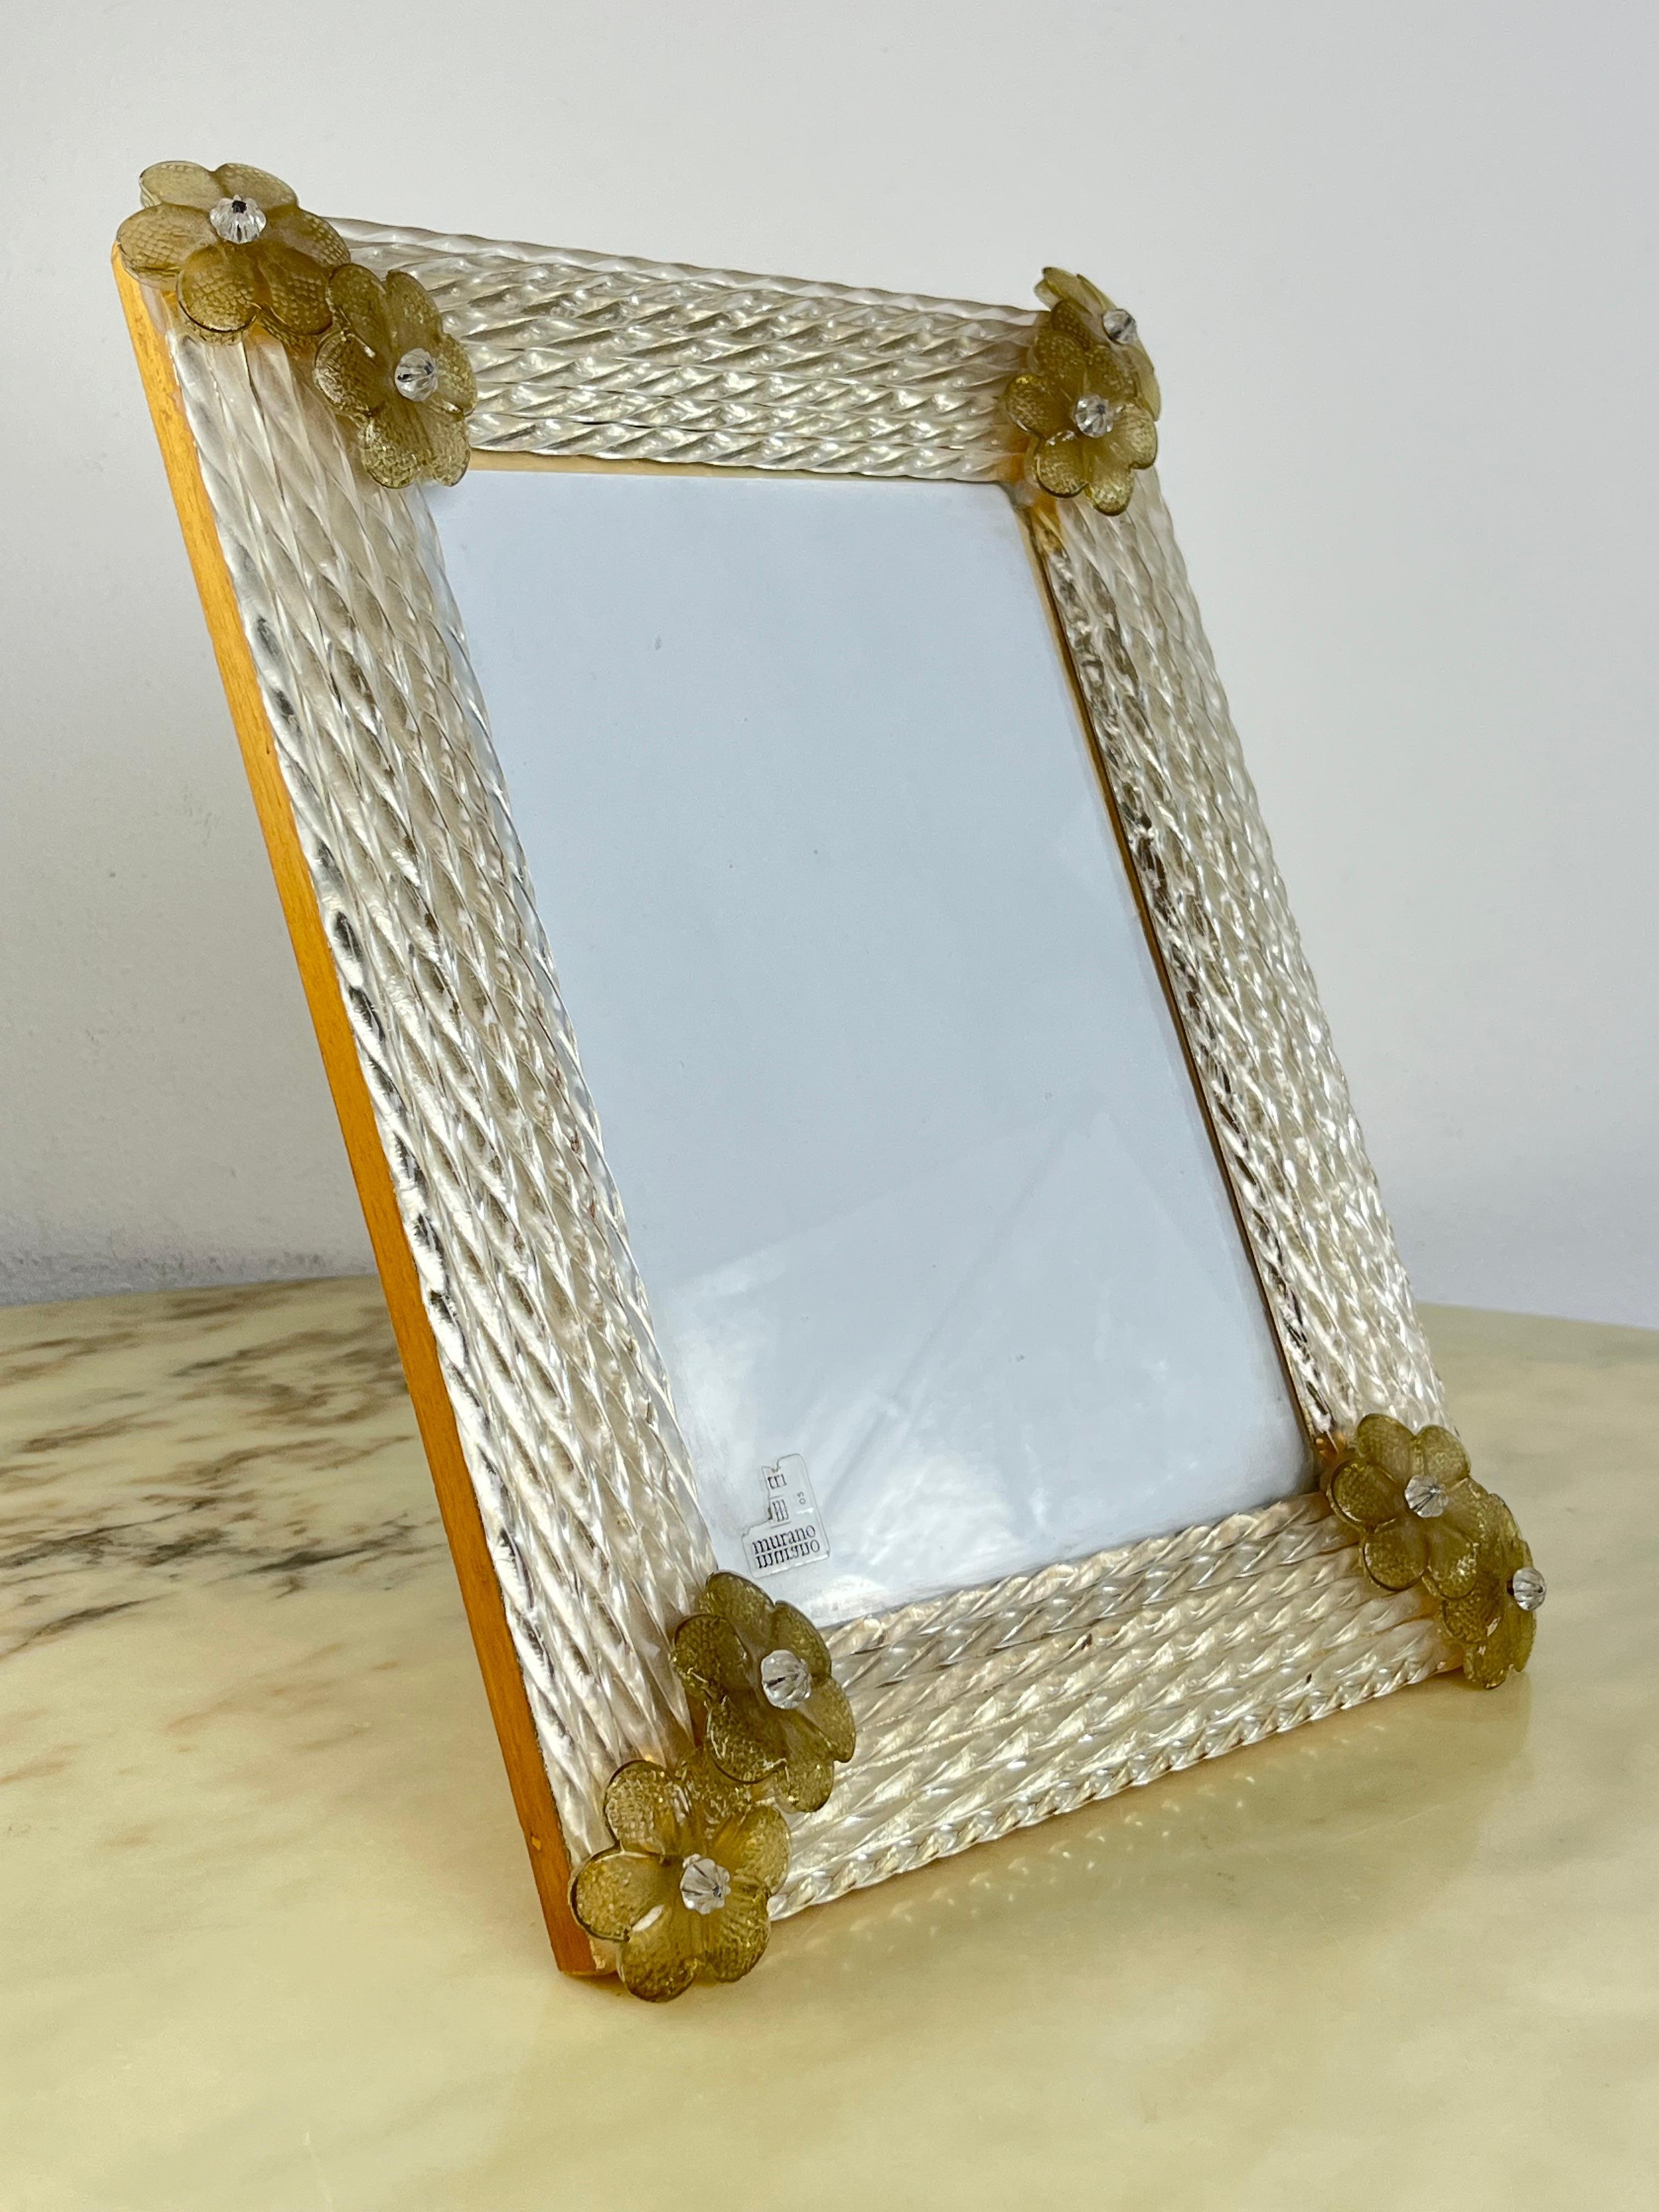 Large Mid-Century Venetian Murano glass photo frame 1950s
It has a hook to hang it on the wall. It can become a mirror.
Intact and in good condition, small signs of aging.
Purchased in Venice in one of the most prestigious shops in Piazza San